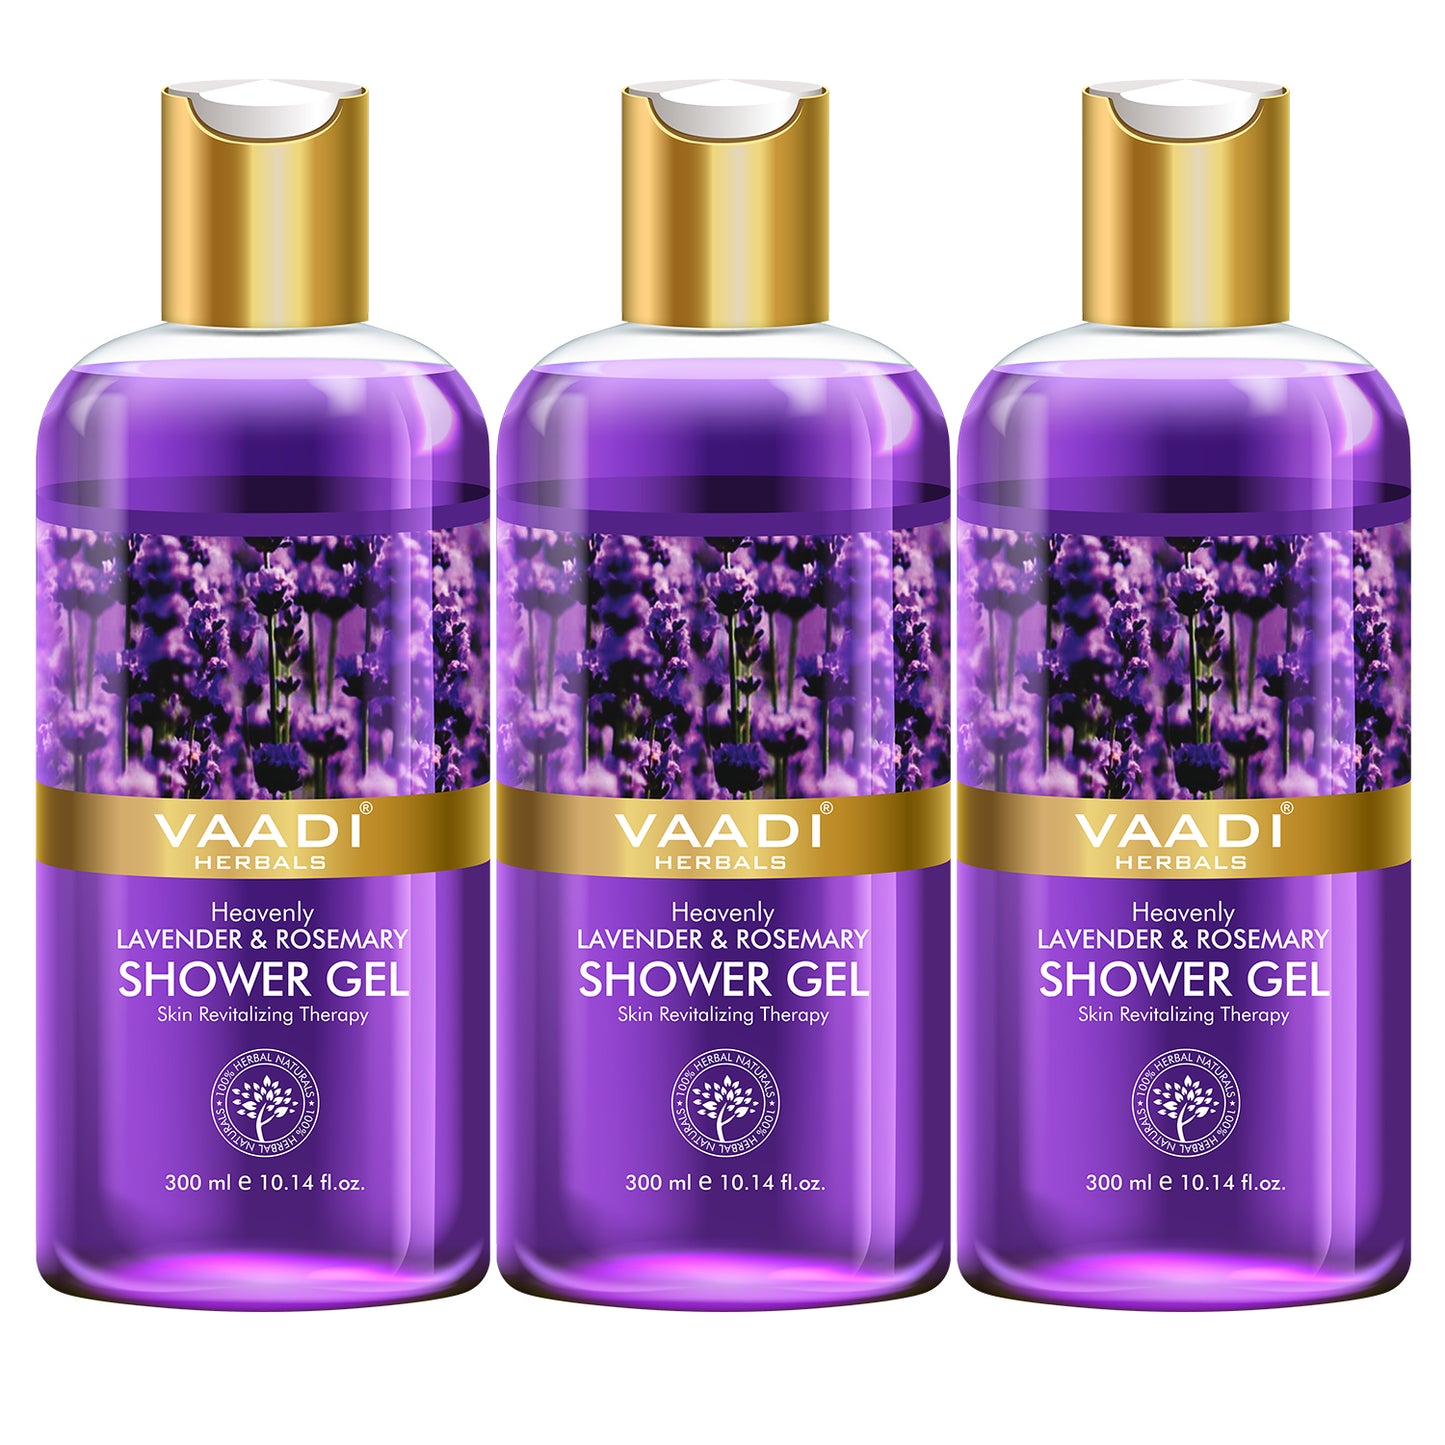 Heavenly Organic Lavender & Rosemary Shower Gel - Skin Rejuvenating Therapy - Relieves Puffiness (3 x 300 ml / 10.2 fl oz)